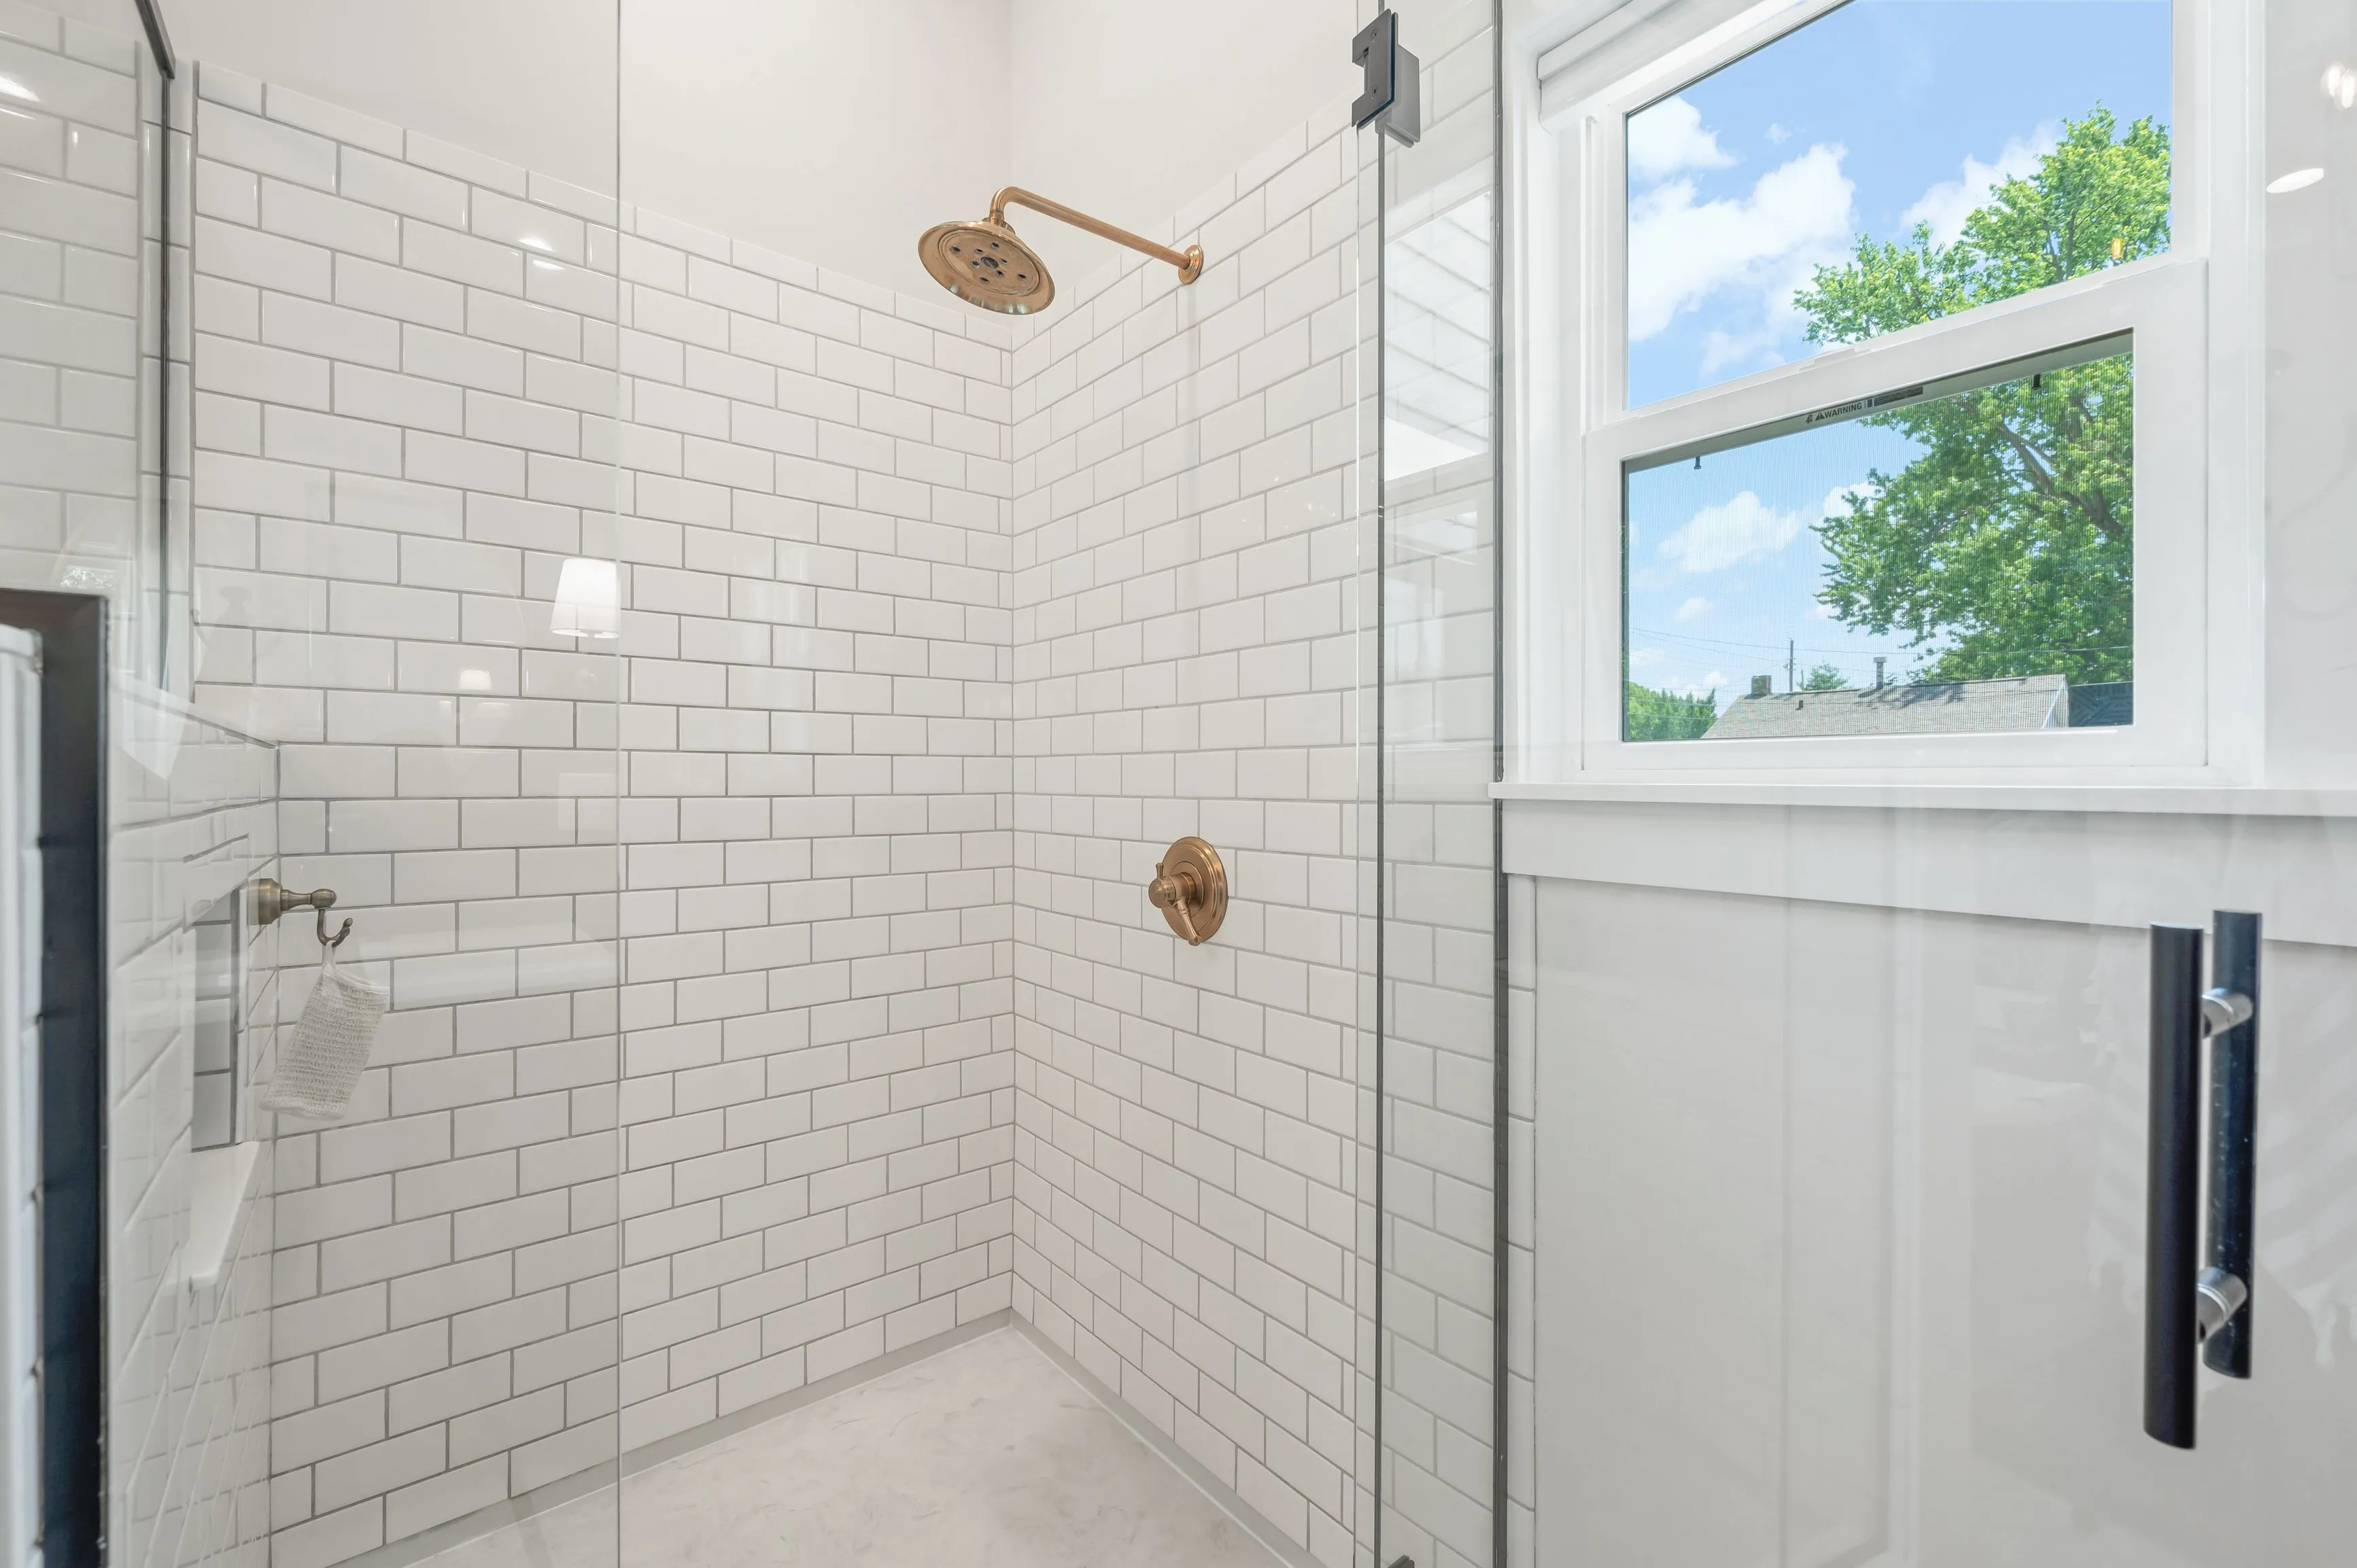 Modern bathroom with white subway tiles, glass shower door, and a window with a view of greenery outside.